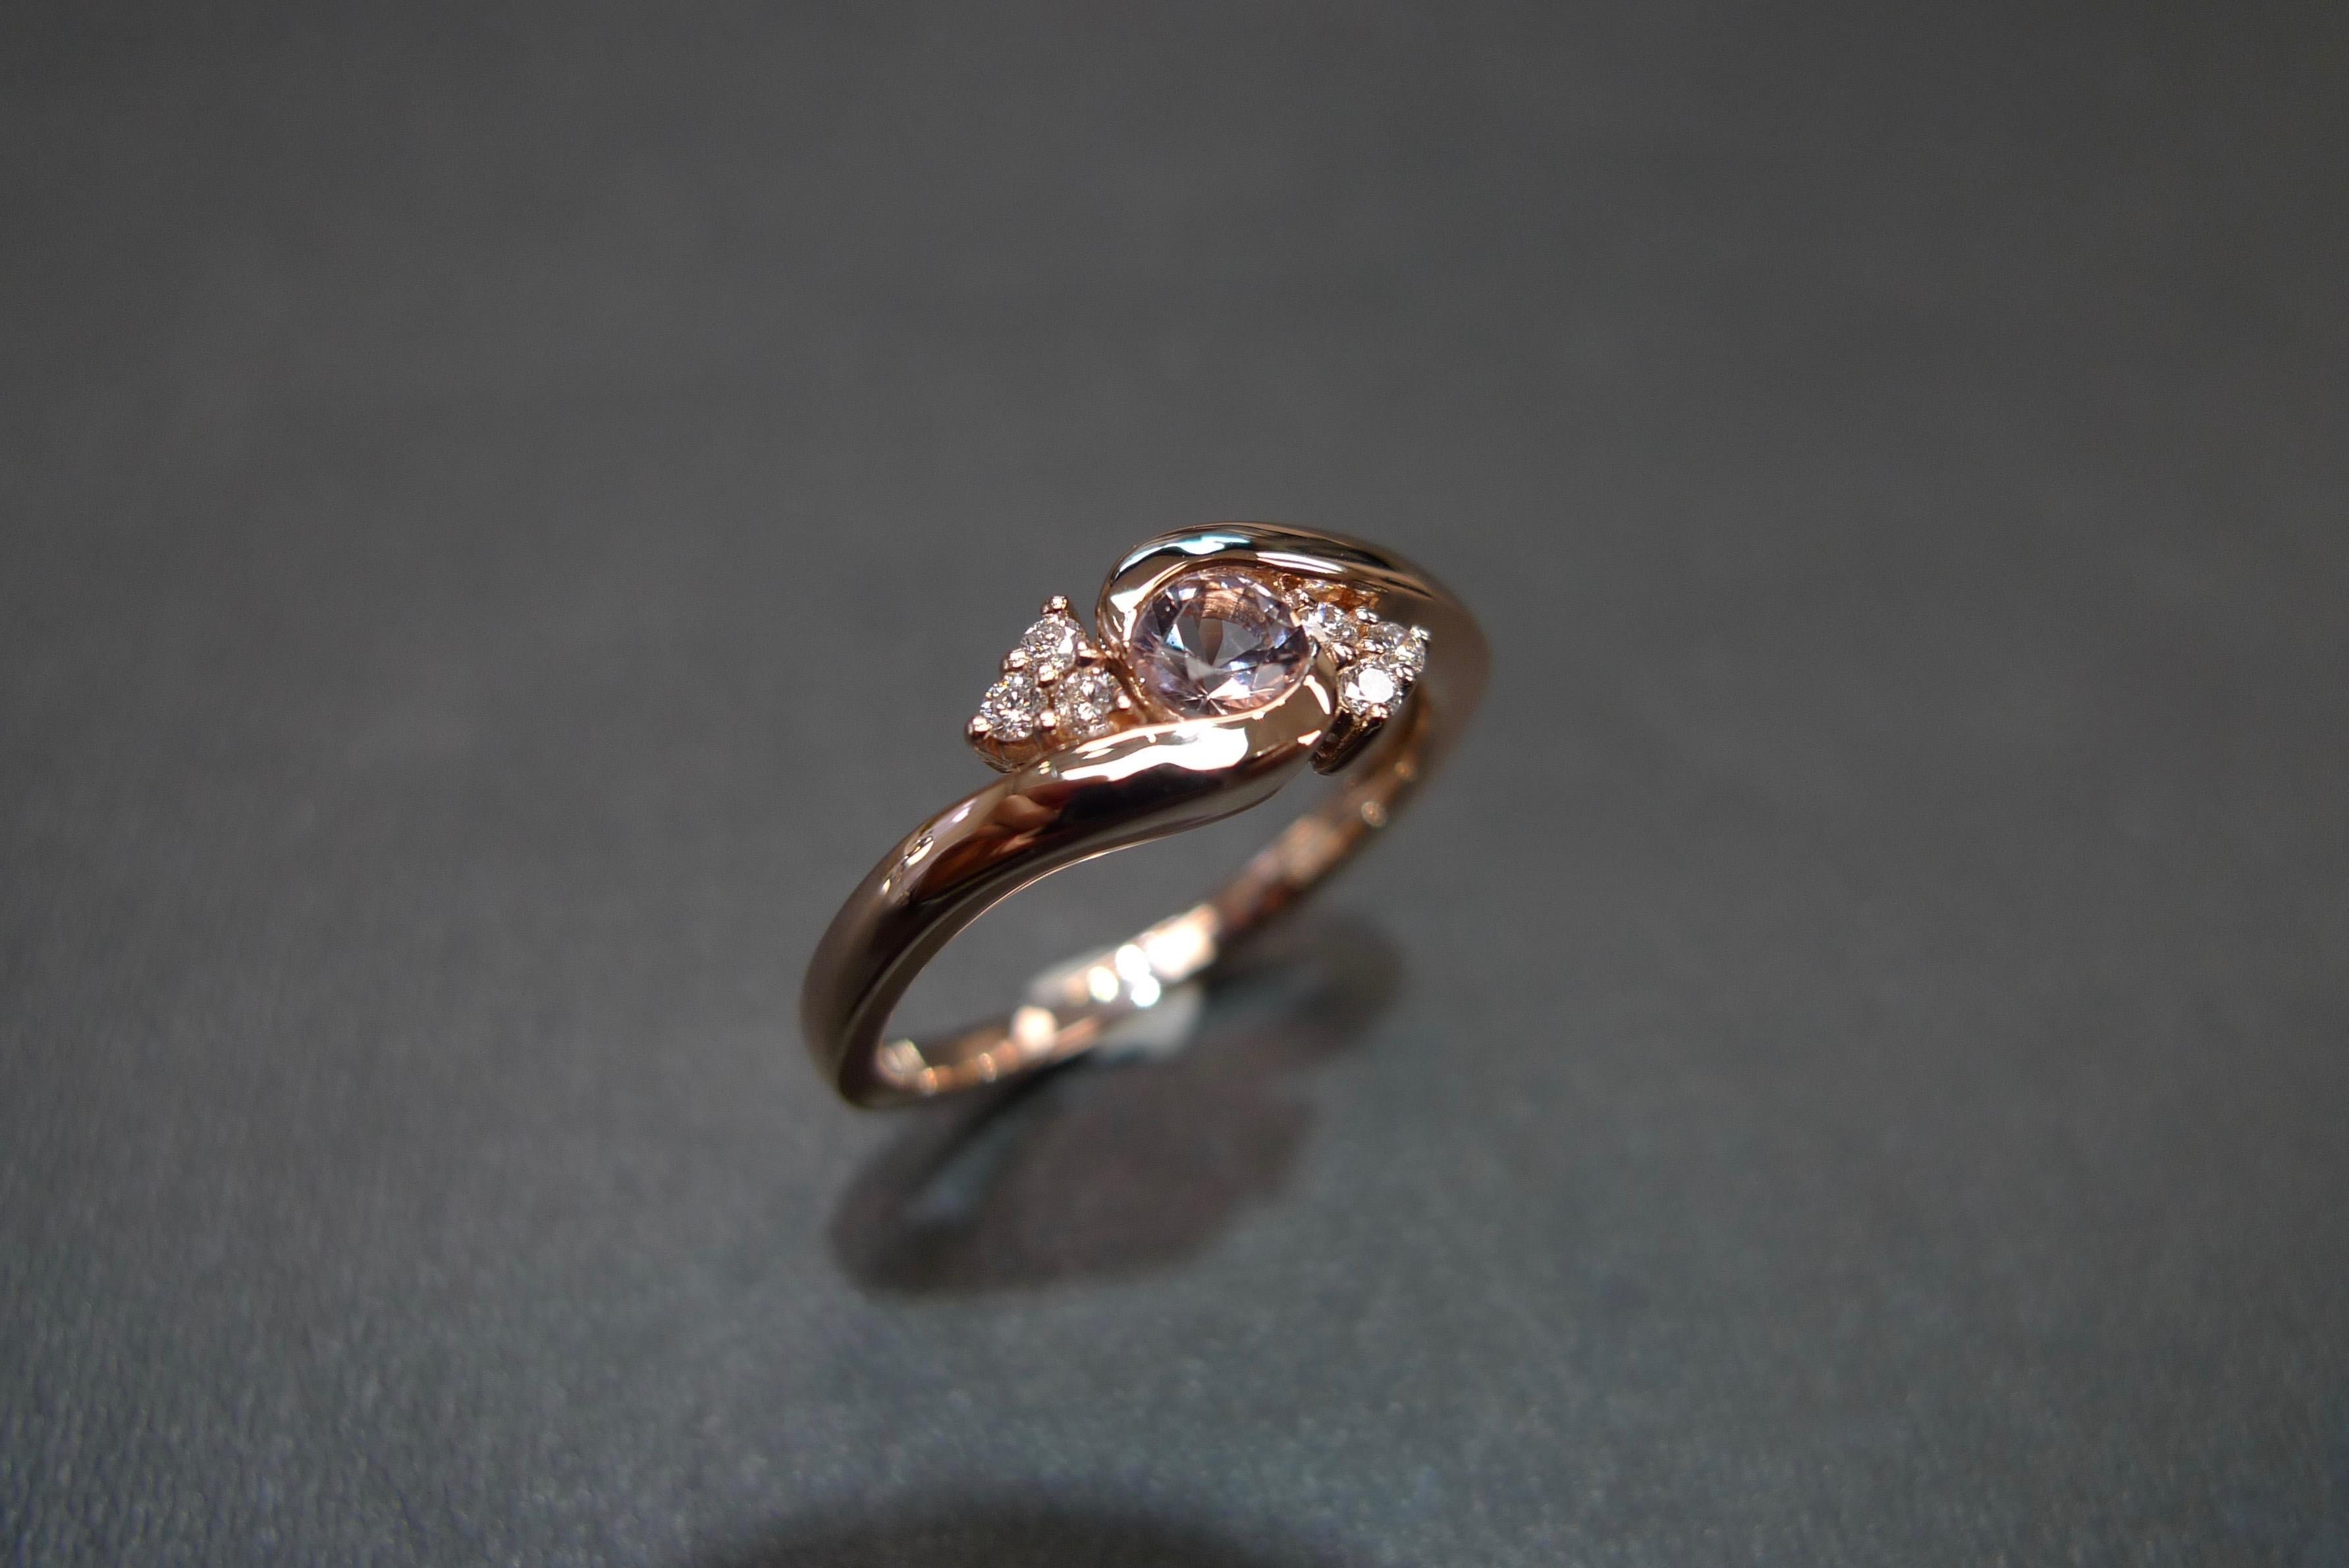 For Sale:  Morganite and Diamonds Twist Tension Ring in 14K Rose Gold 6